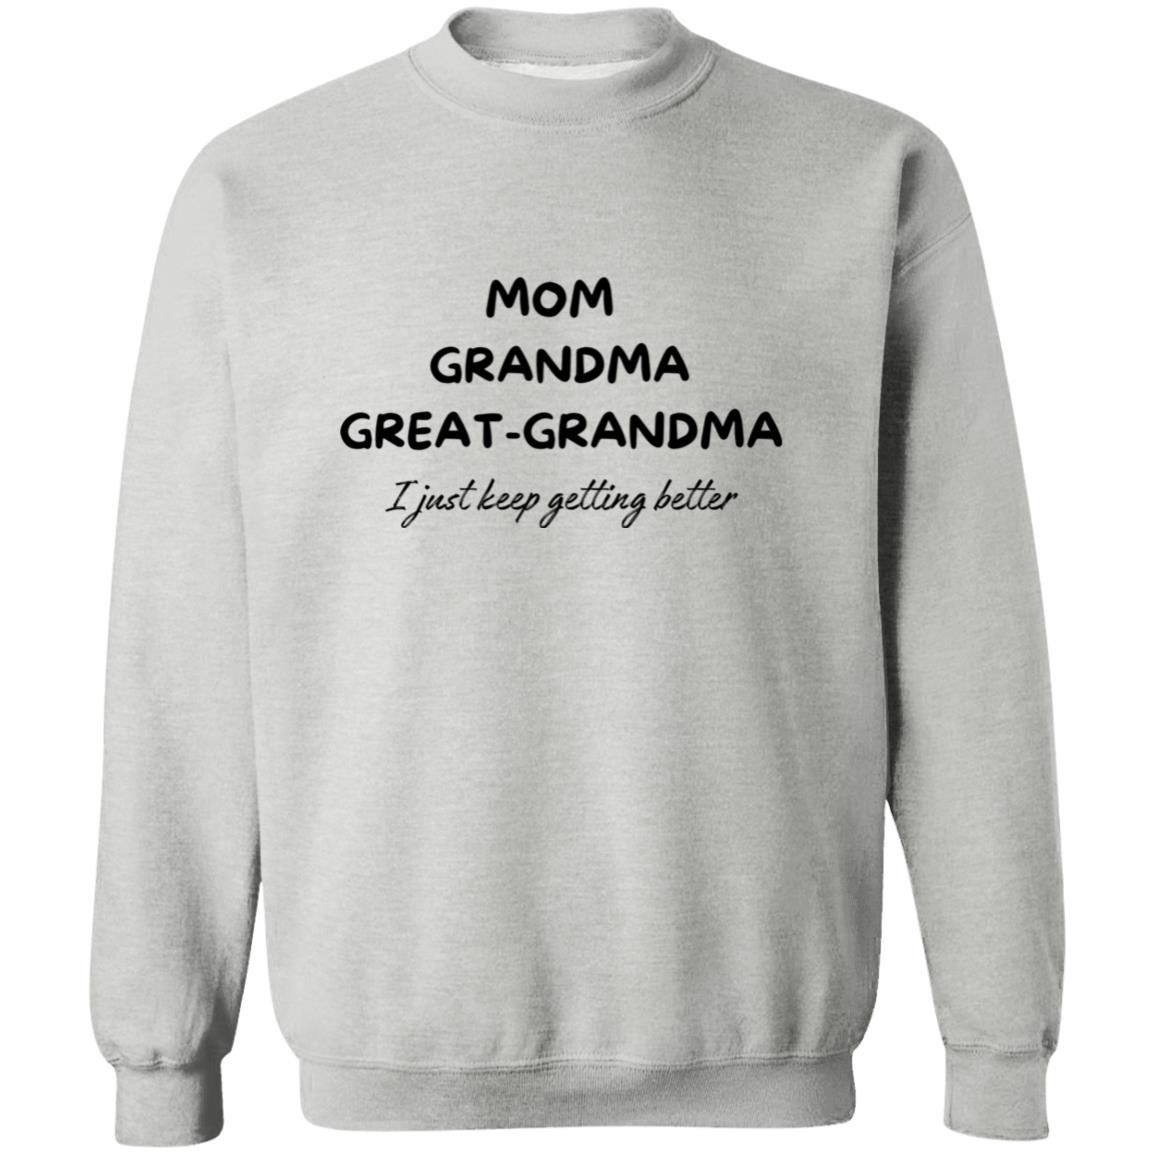 Get trendy with Mom Grandma, Great-grandma I Just Keep Getting Better Crewneck Sweatshirt - Sweatshirts available at Good Gift Company. Grab yours for $24.95 today!